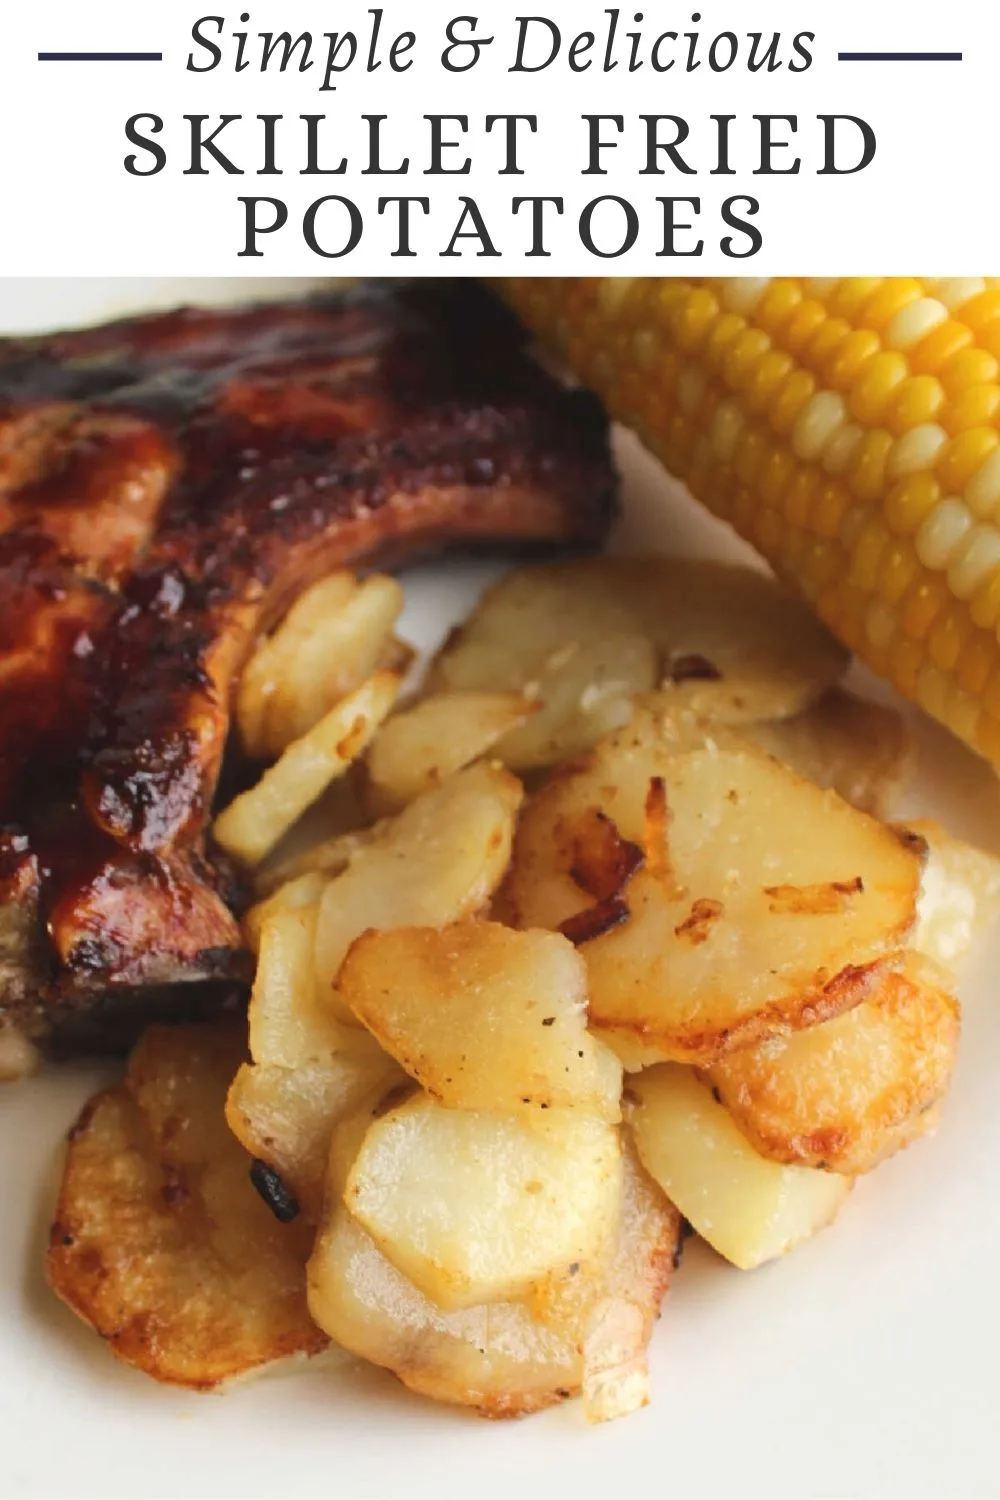 This fried potatoes recipe is the perfect side for any main dish. The skillet potatoes are one of our favorite ways to enjoy the simple flavor of tasty spuds.